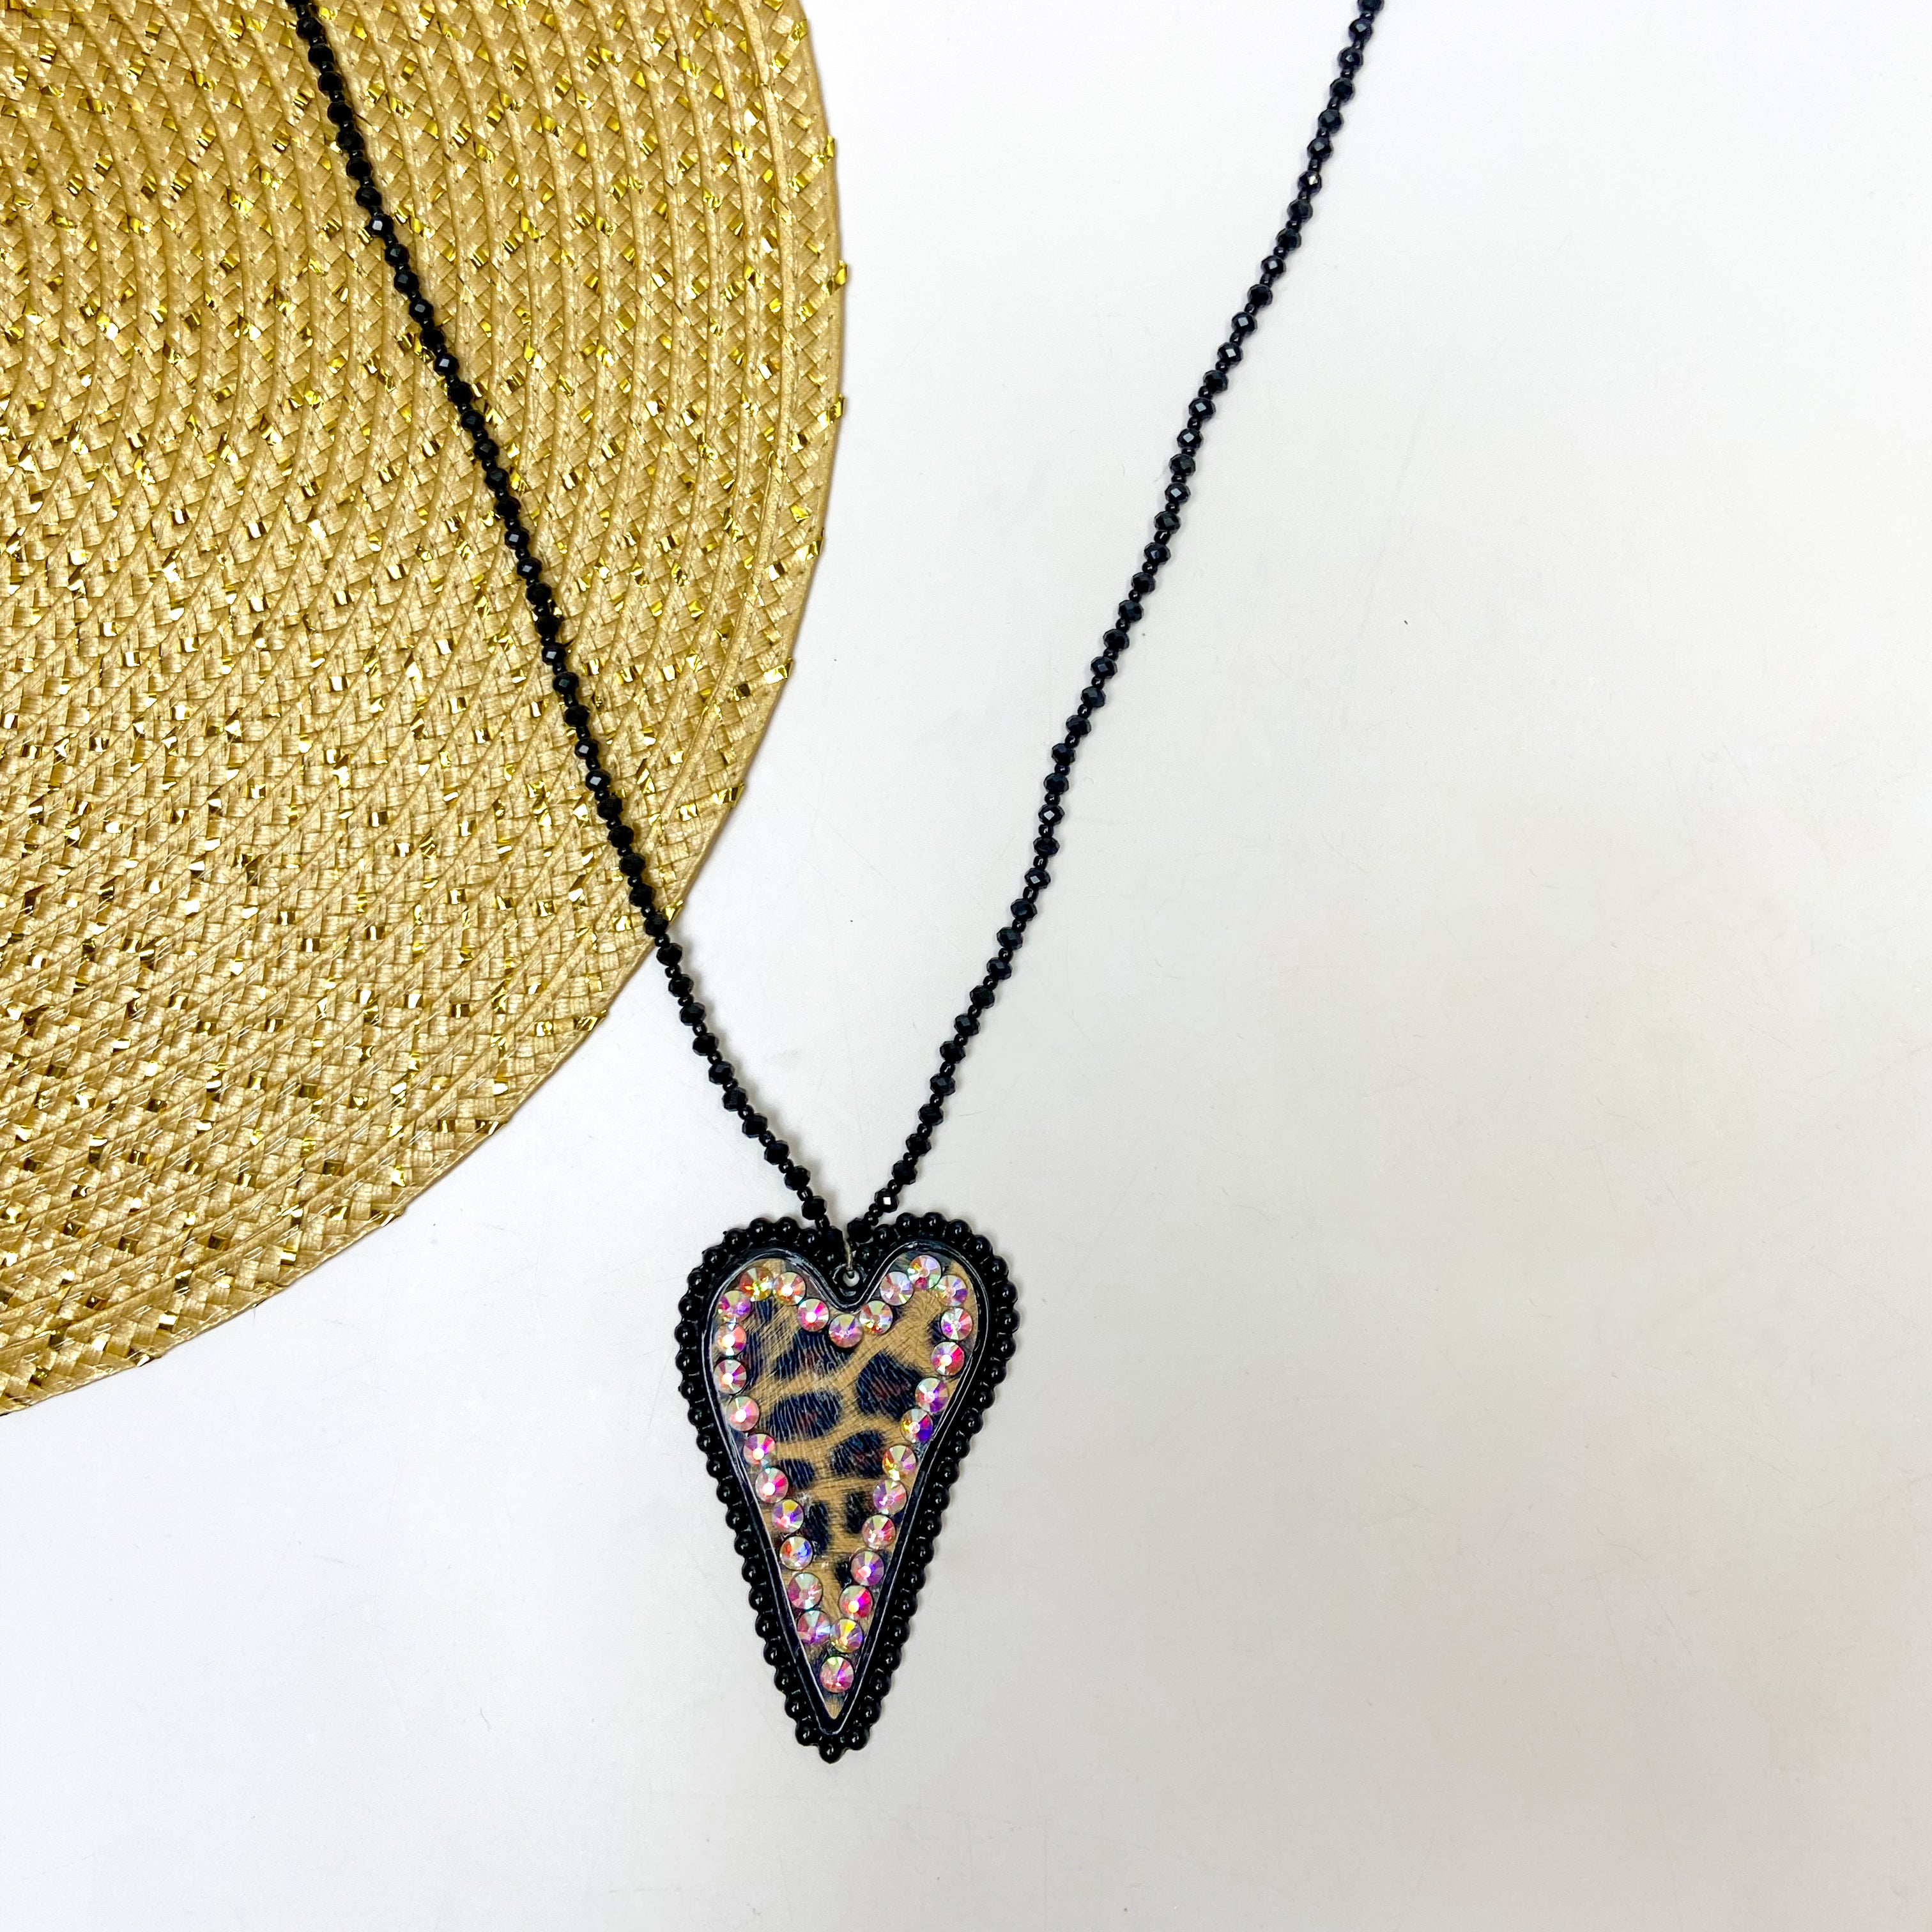 Black Beaded Necklace With Leopard Print Heart Pendant and AB Crystal Border Accents